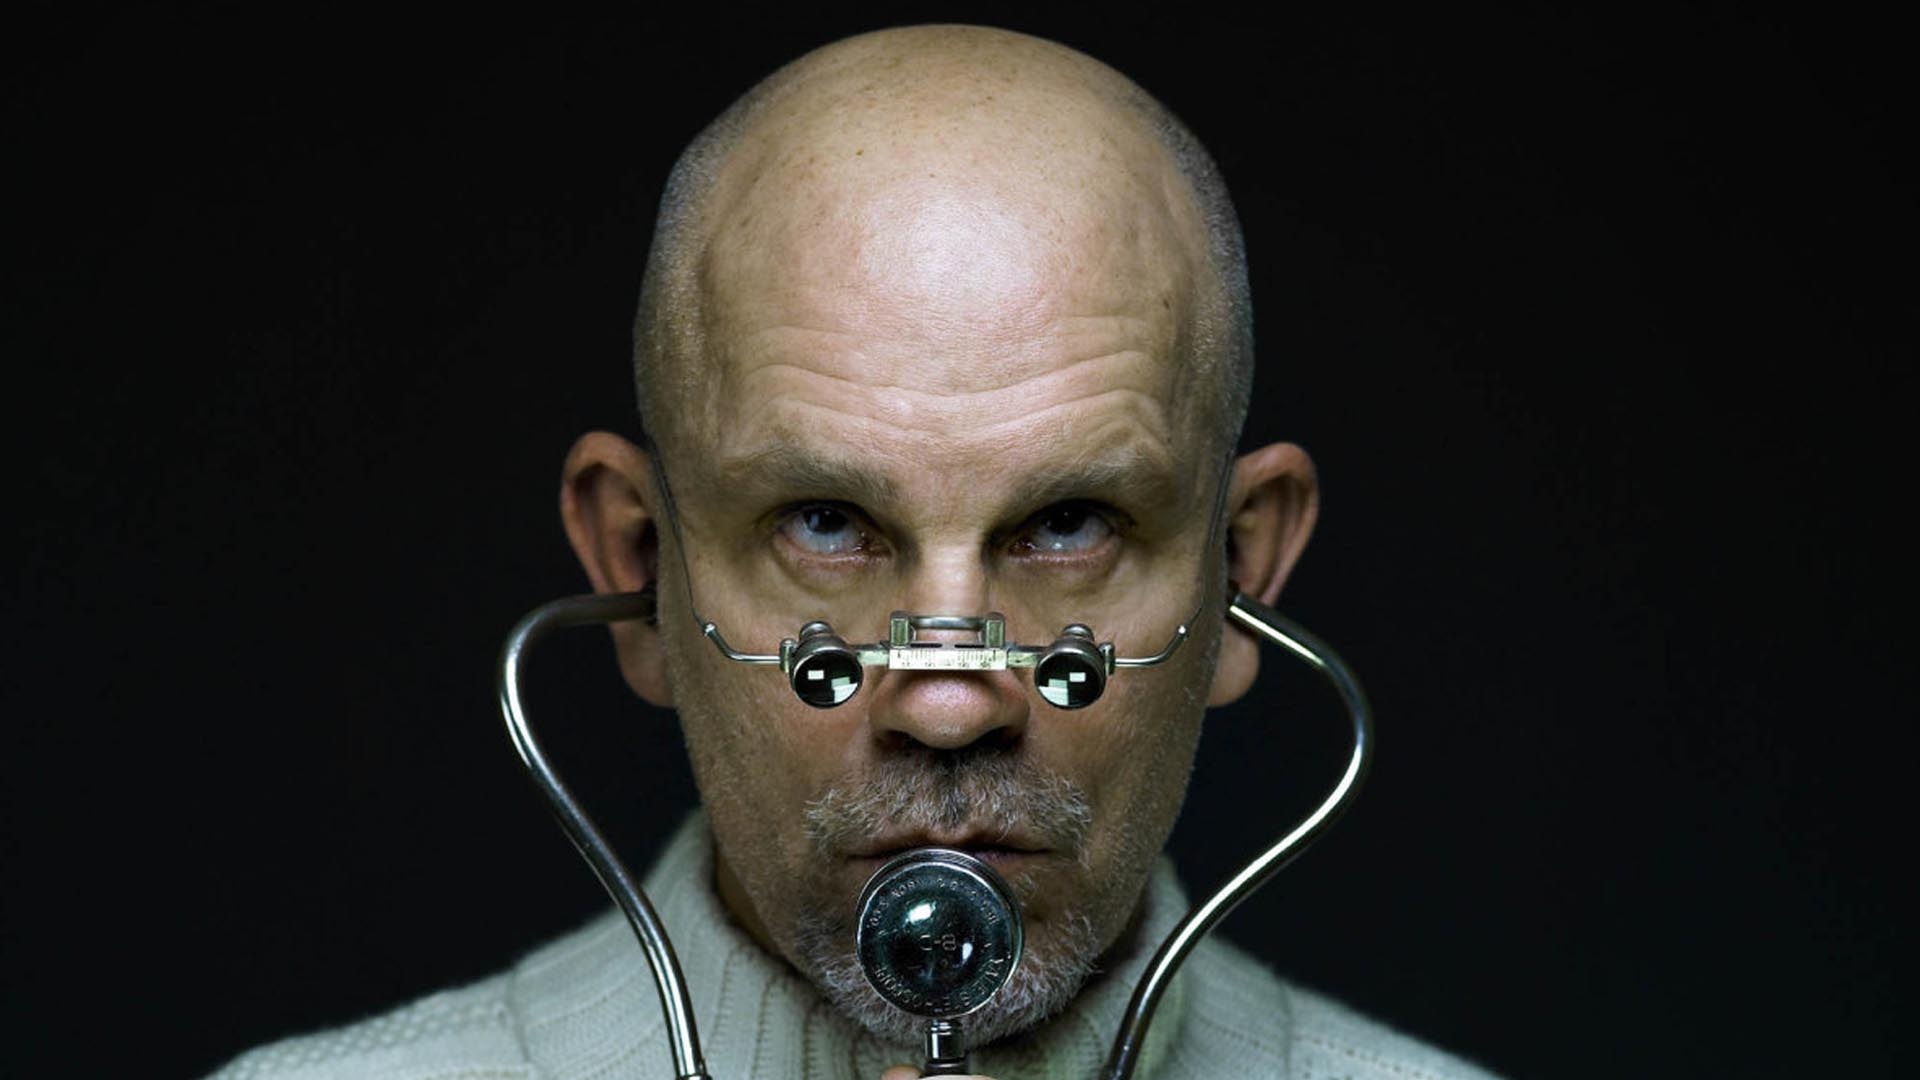 John Malkovich, Gallery of wallpapers, Captivating portraits, Immersive images, 1920x1080 Full HD Desktop